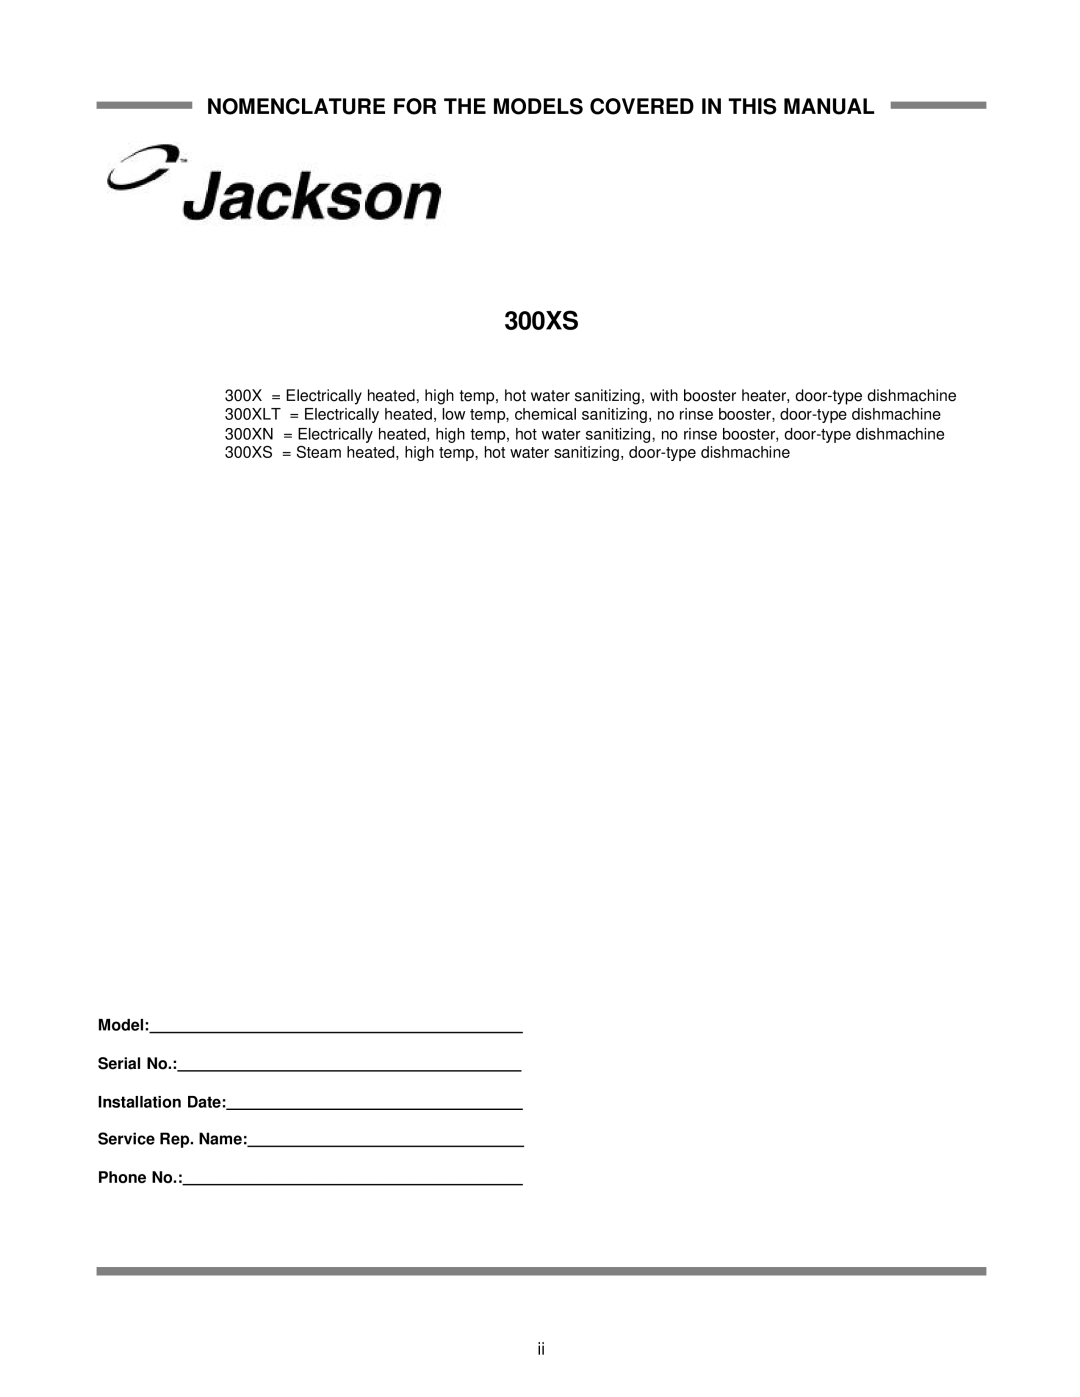 Jackson 300XS, 300XLT, 300XN technical manual Nomenclature For The Models Covered In This Manual 